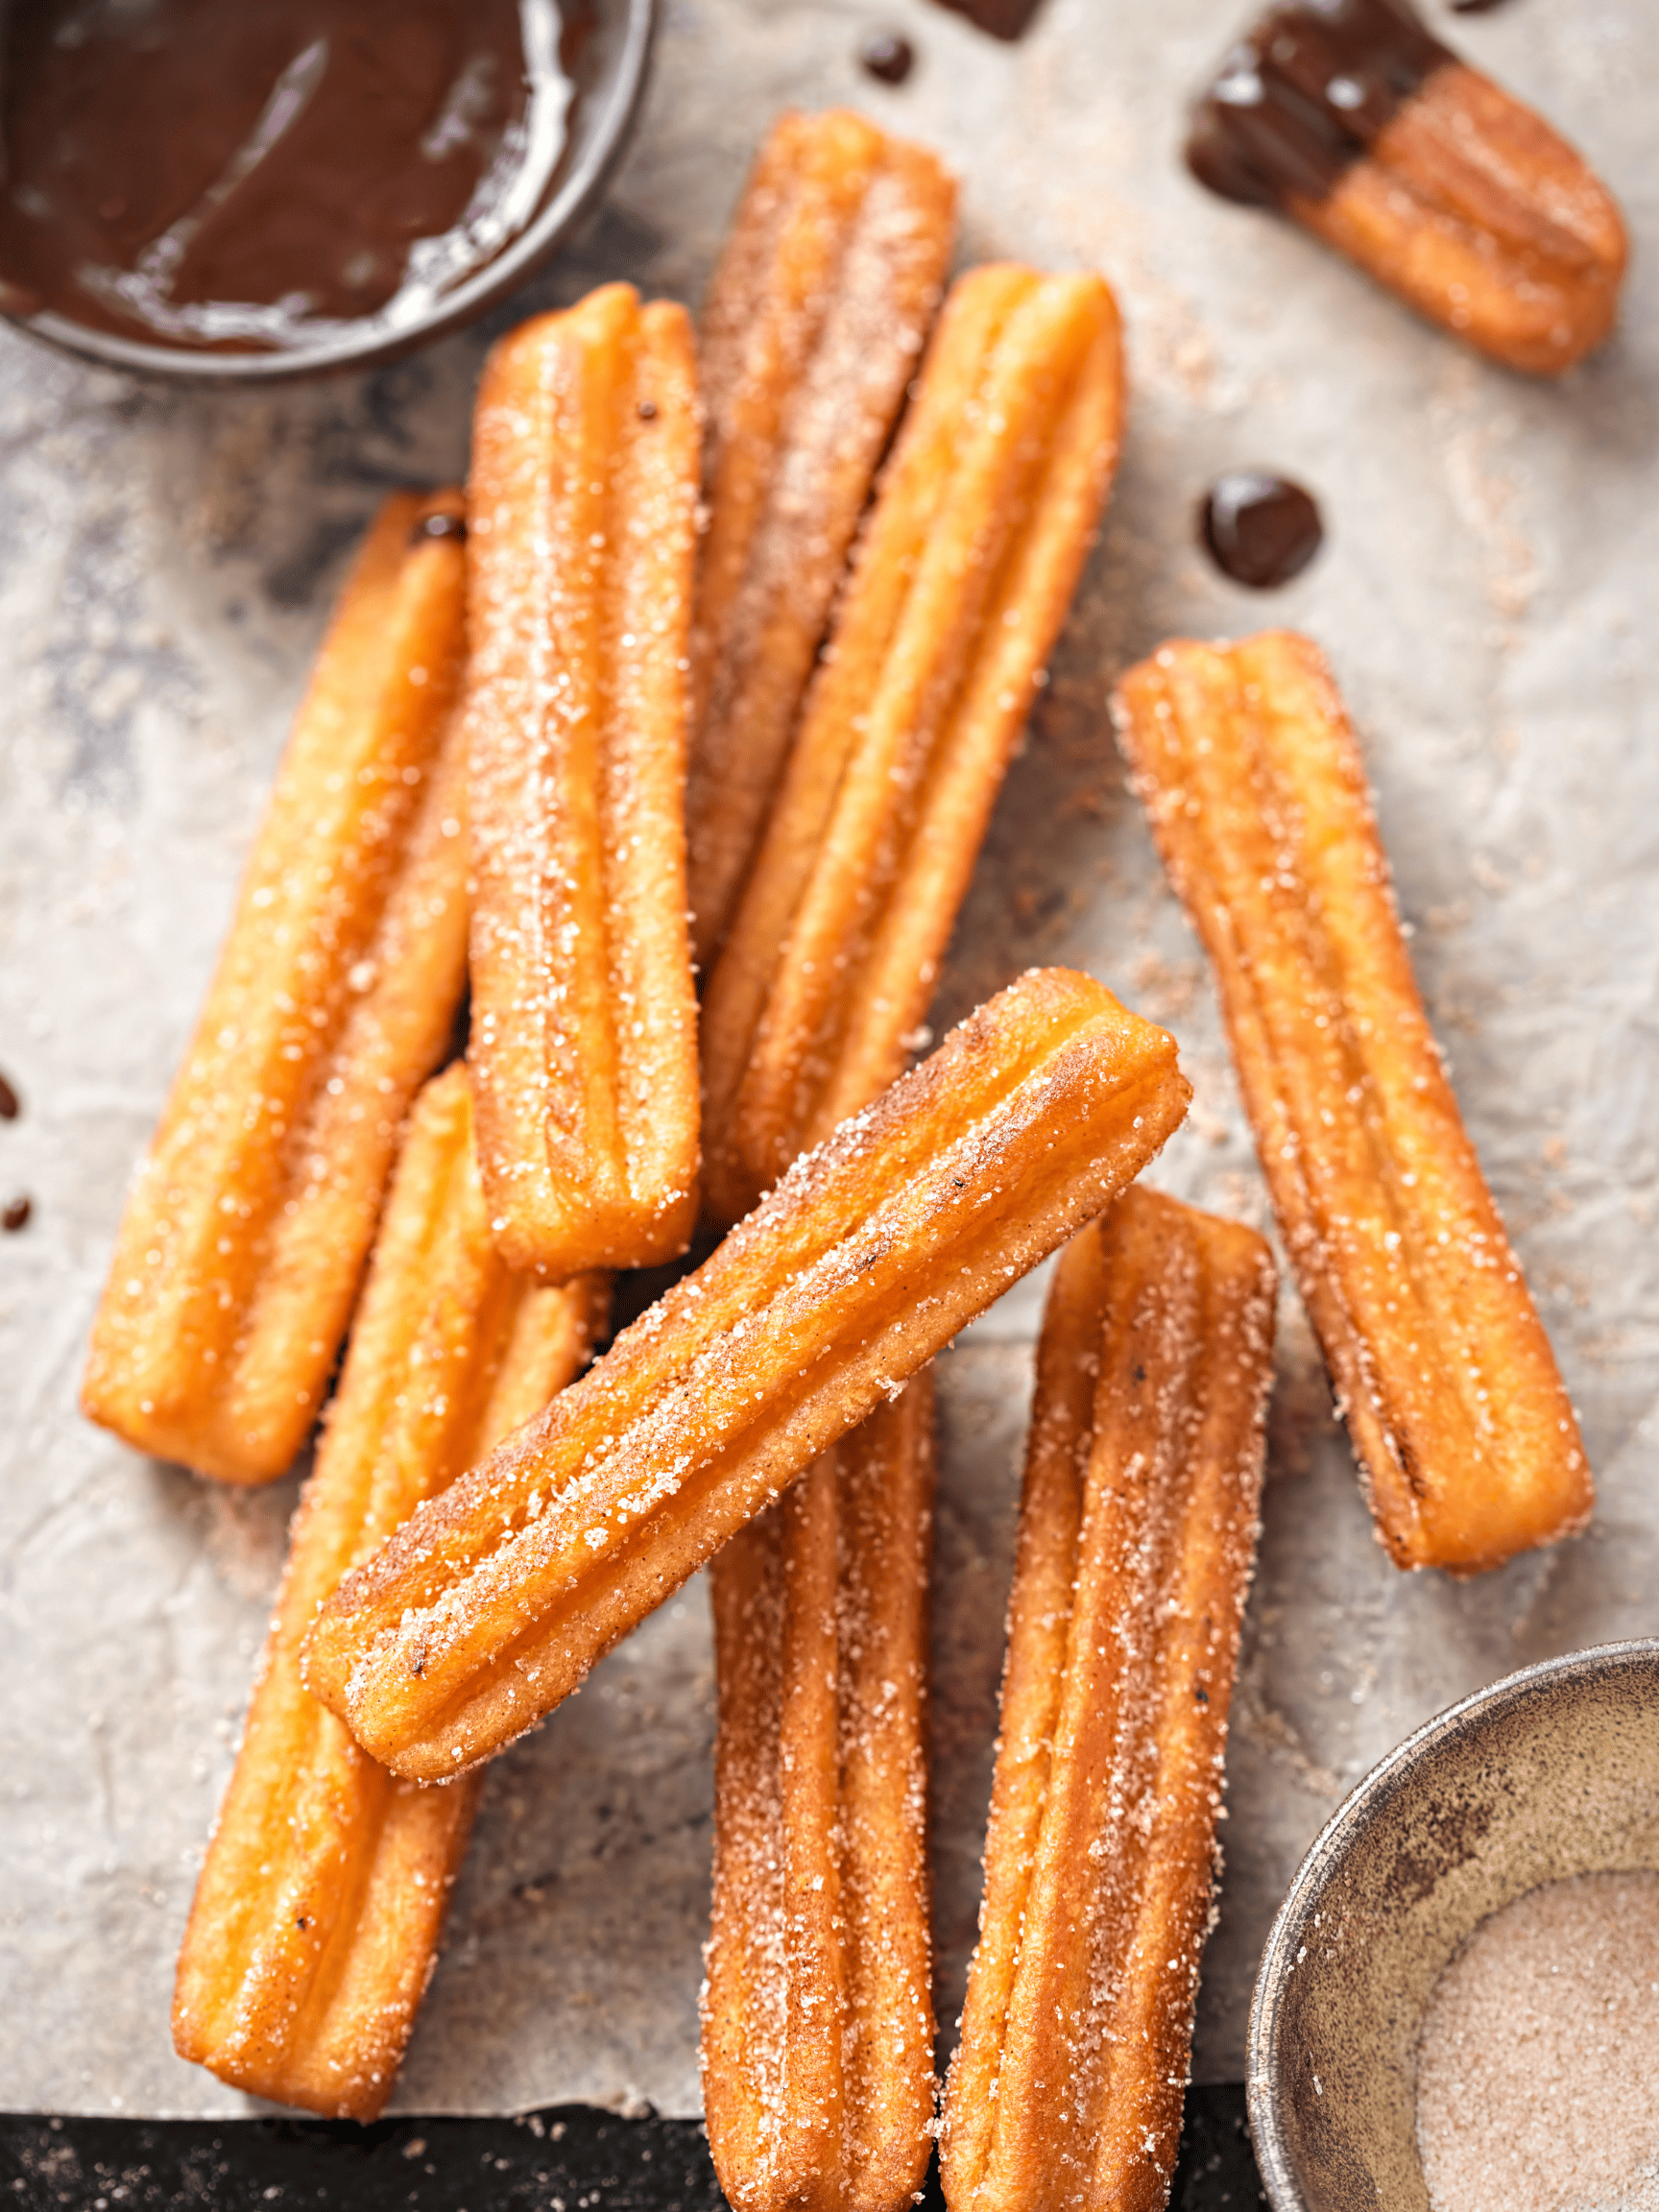 How to Reheat Churros 3 Ways (Air Fryer, Oven, Stove)